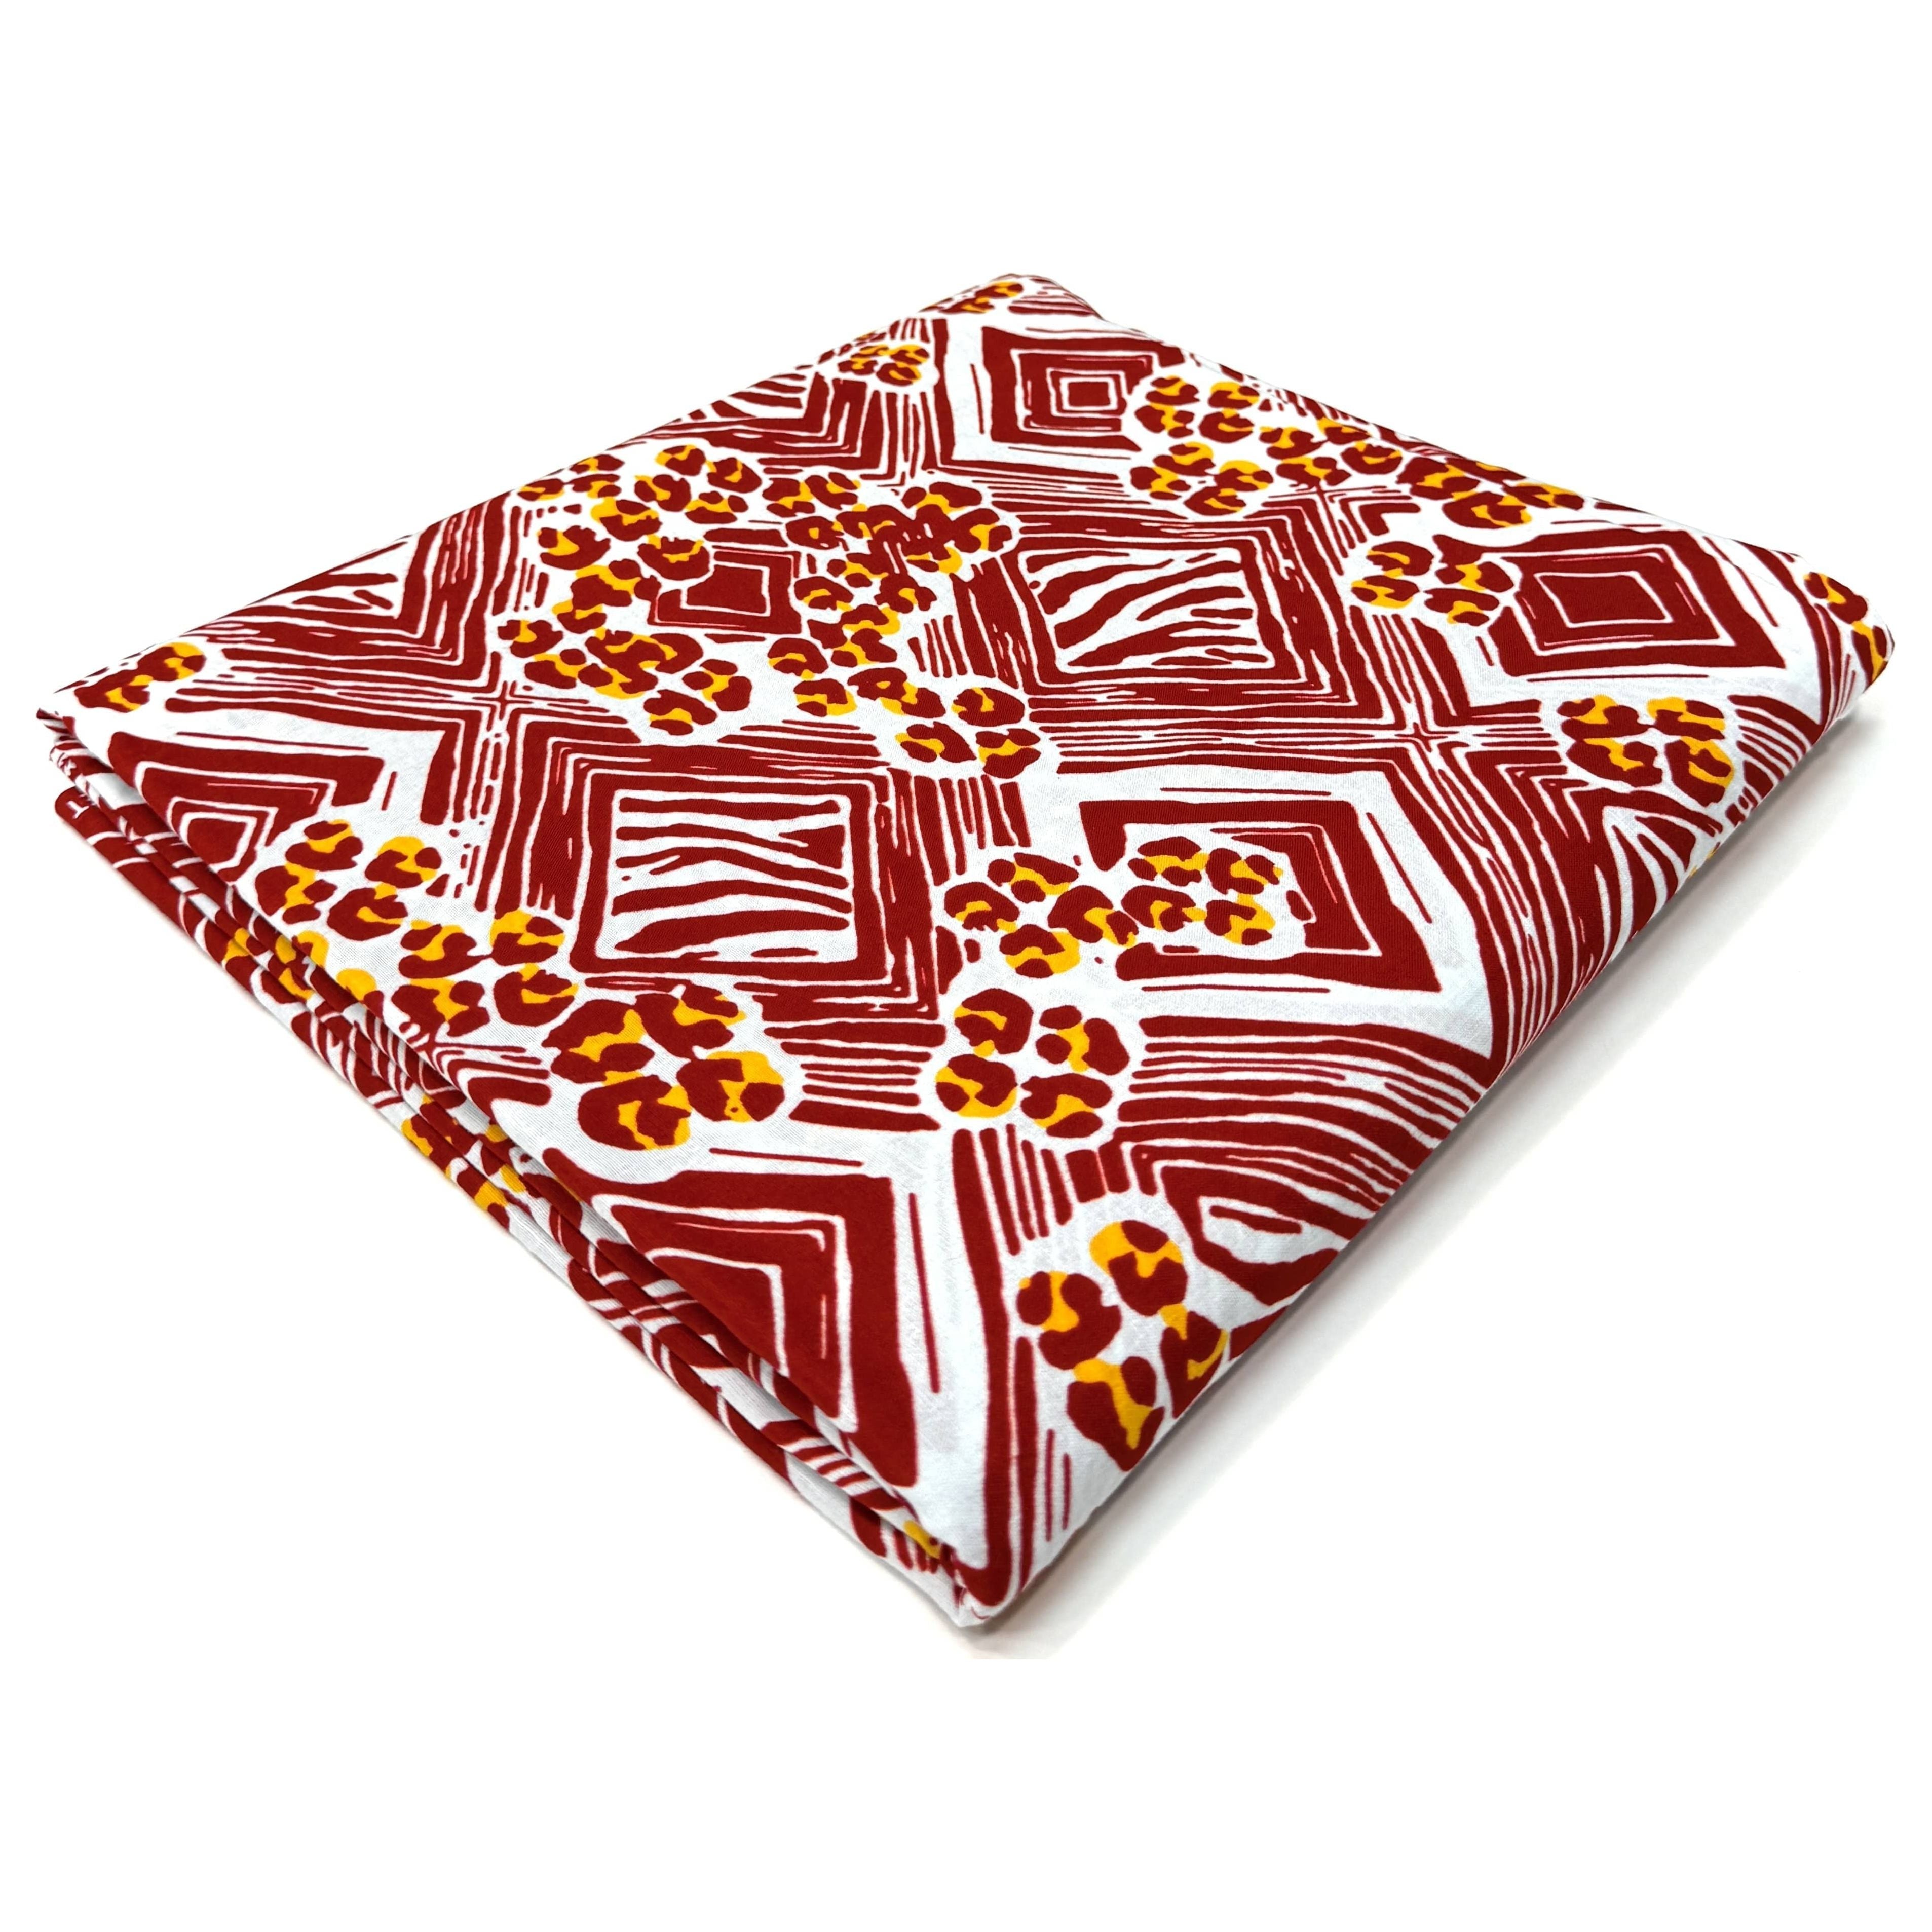 Wax Tissu Pagne Africain - Coupon 2 Yards 100% Coton - BLANC / ROUGE